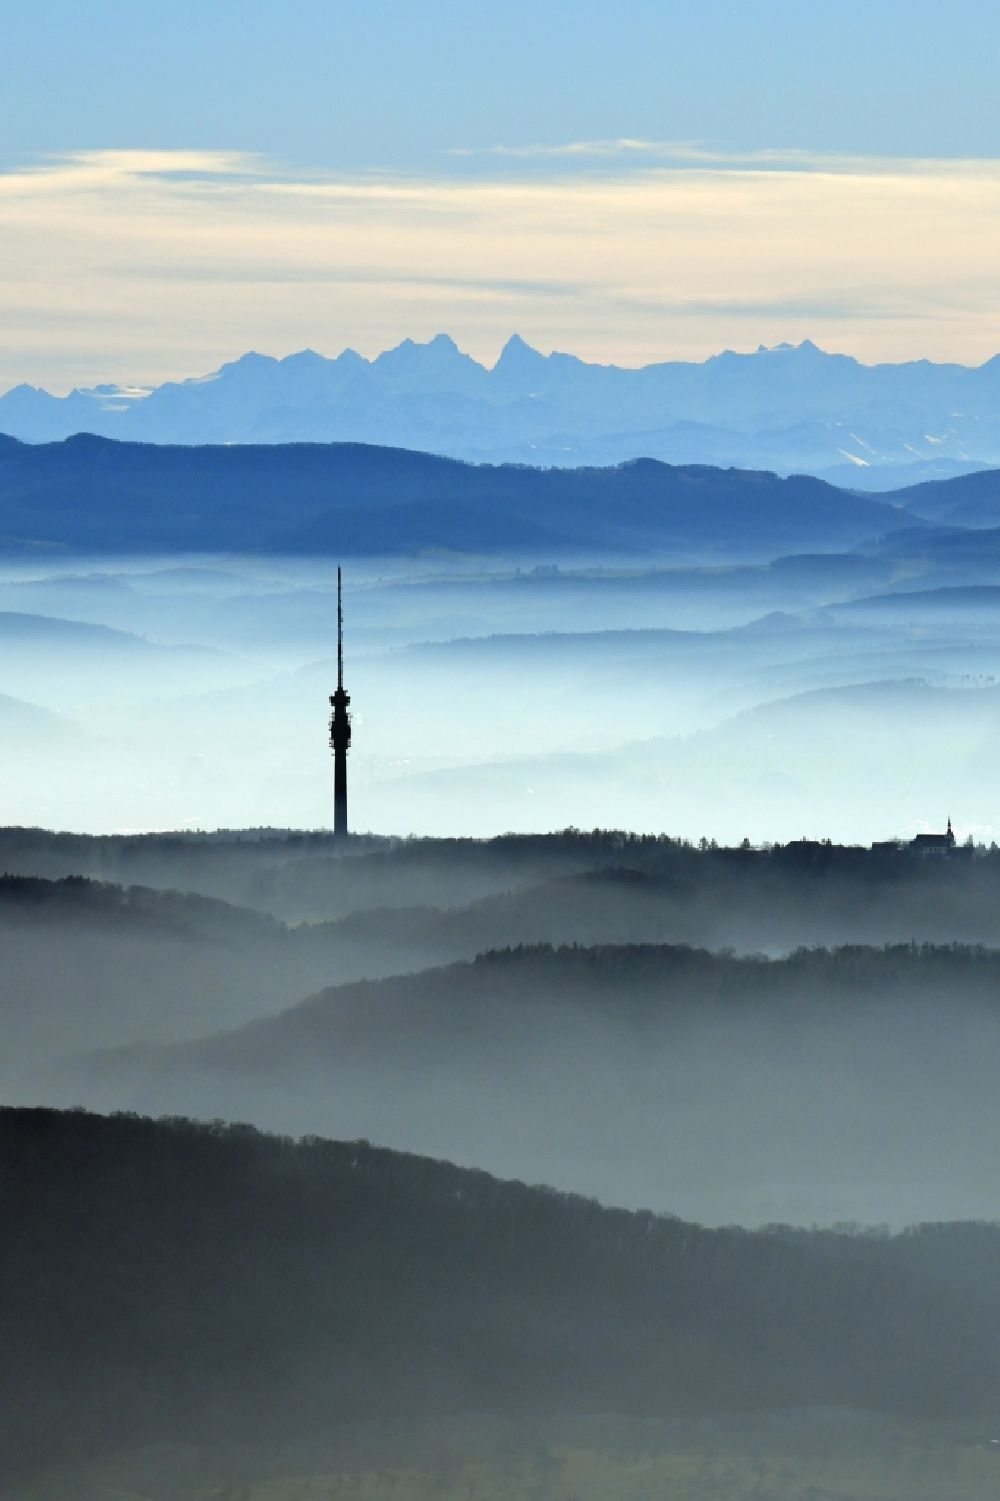 Bettingen from above - Weather with layered fog cover ueber dem Fernsehturm St. Chrischona on Hohestrasse in Bettingen in the canton Basel, Switzerland